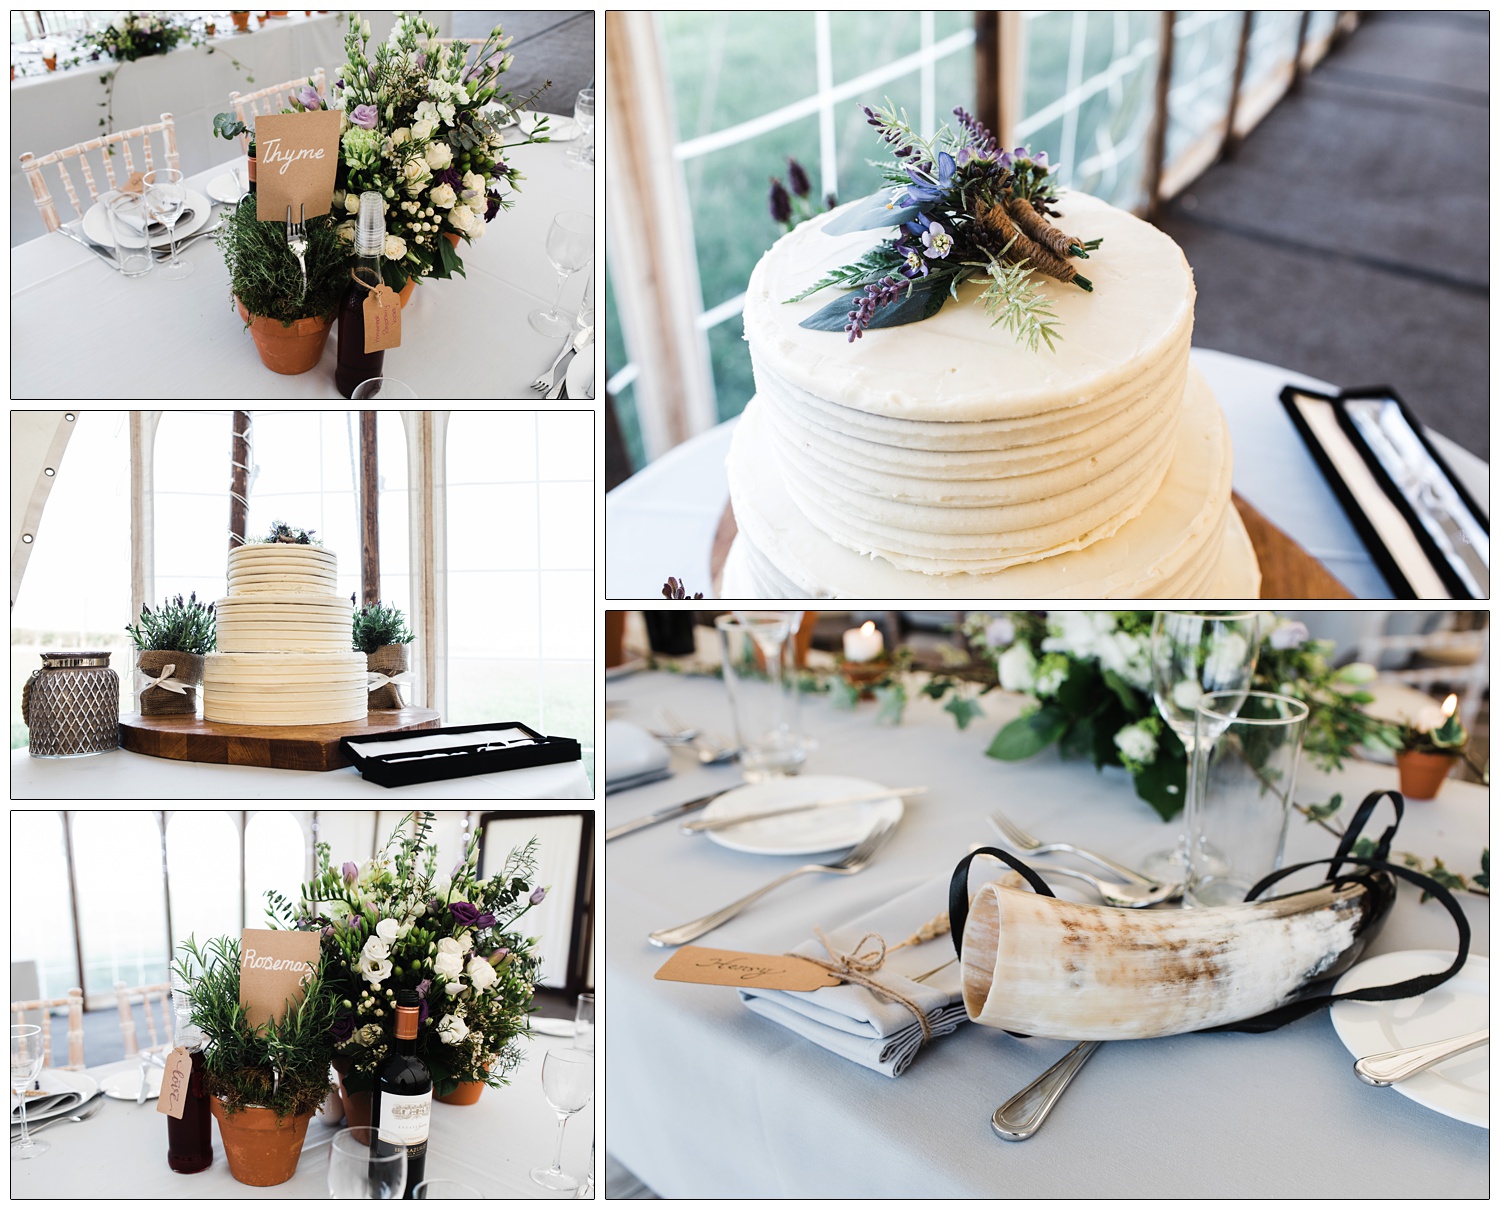 A wedding cake. Thyme and rosemary plants on the tables.